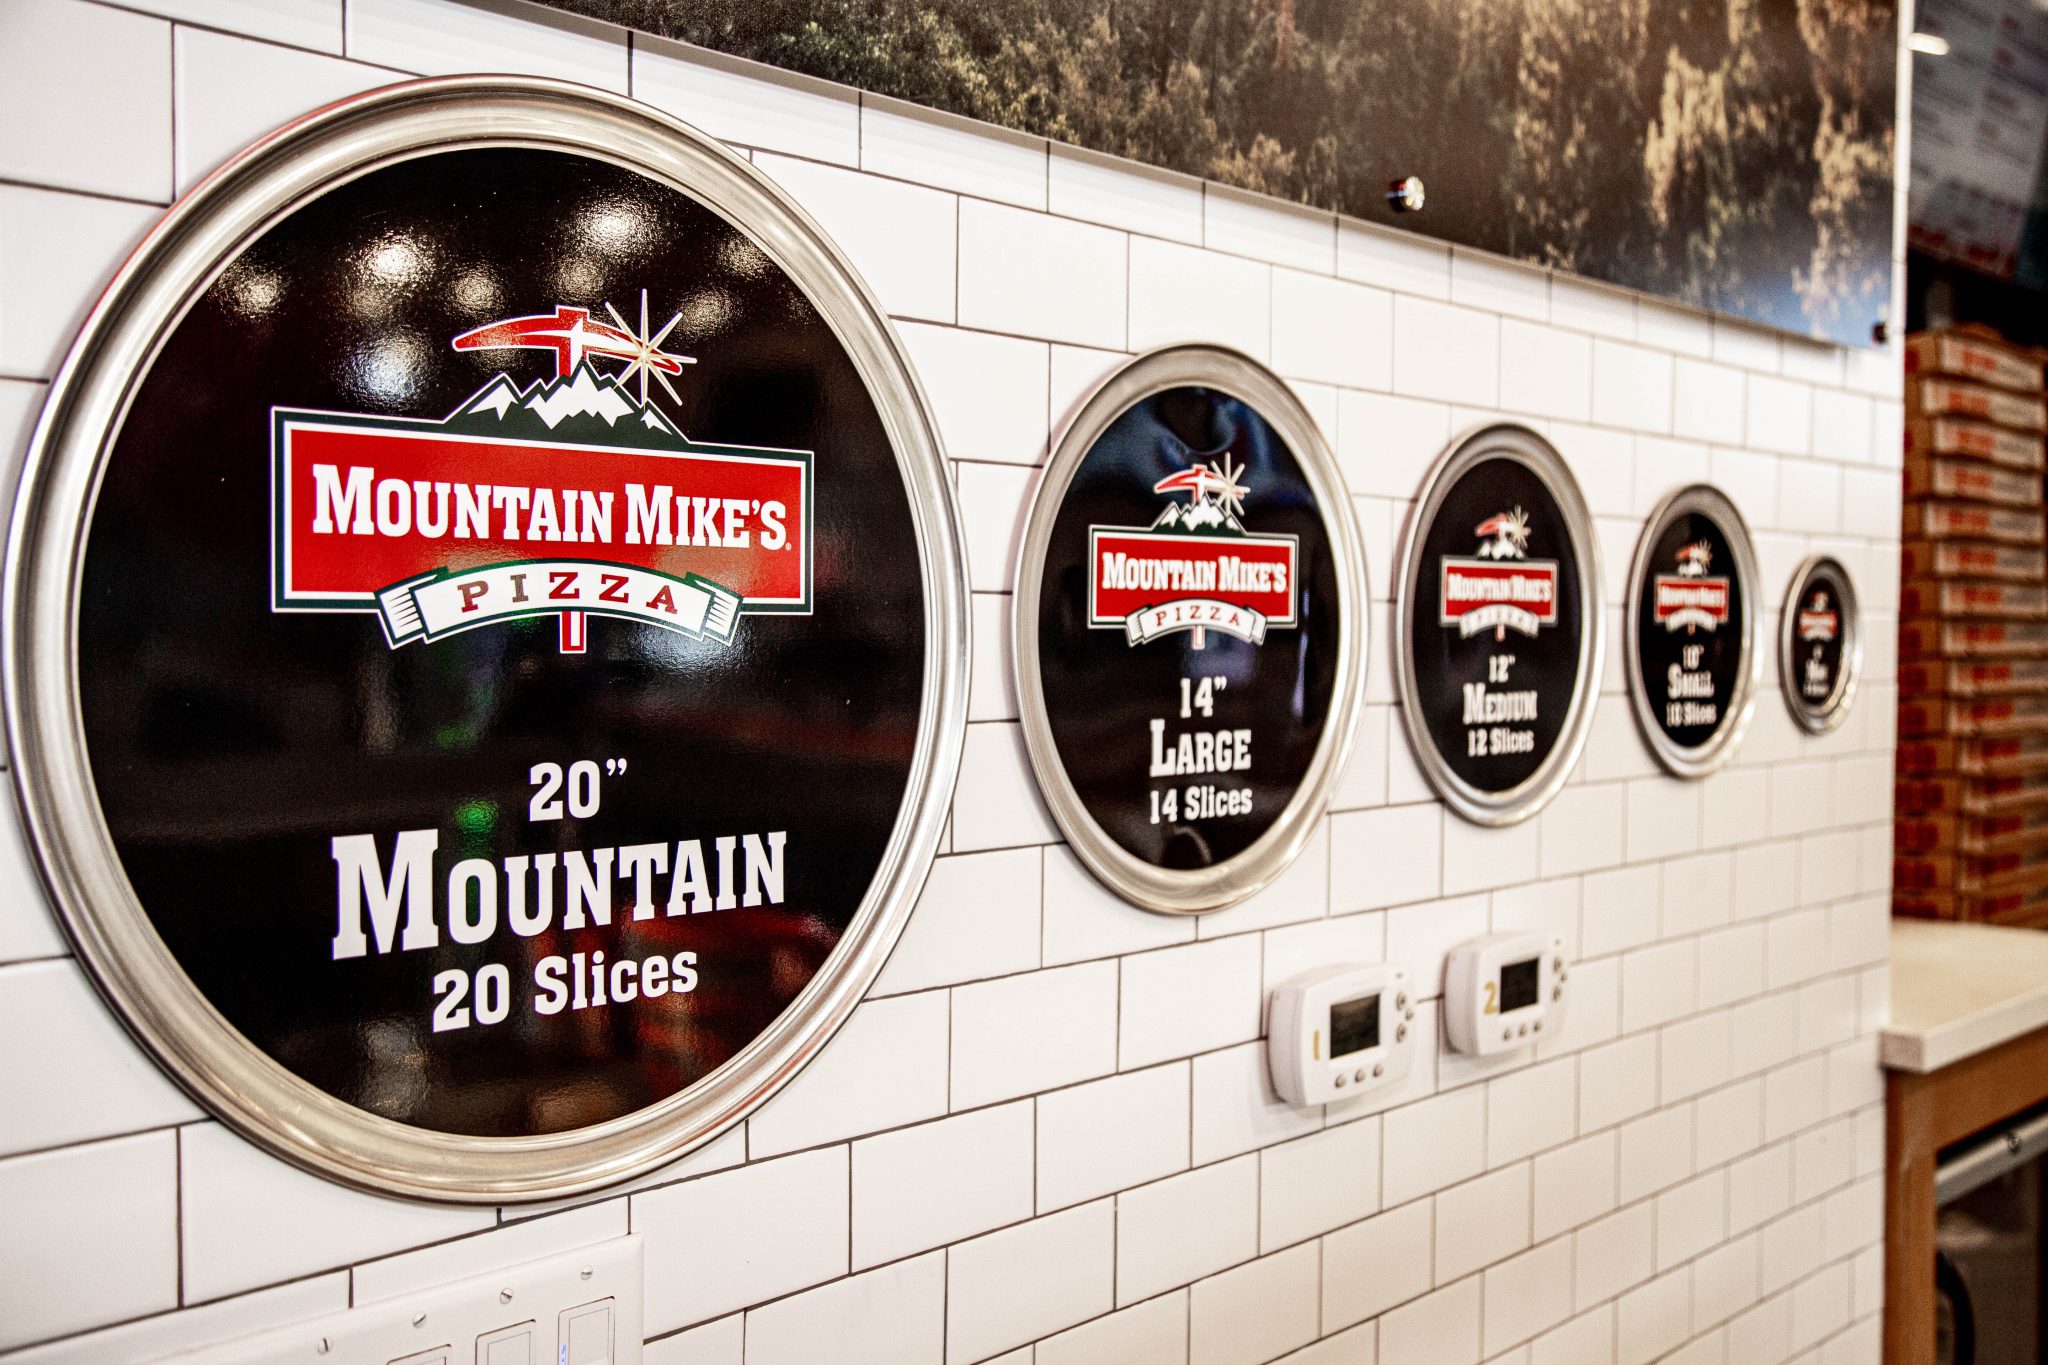 Mountain Mike’s Pizza Opens First Idaho Location, Plans 4 More